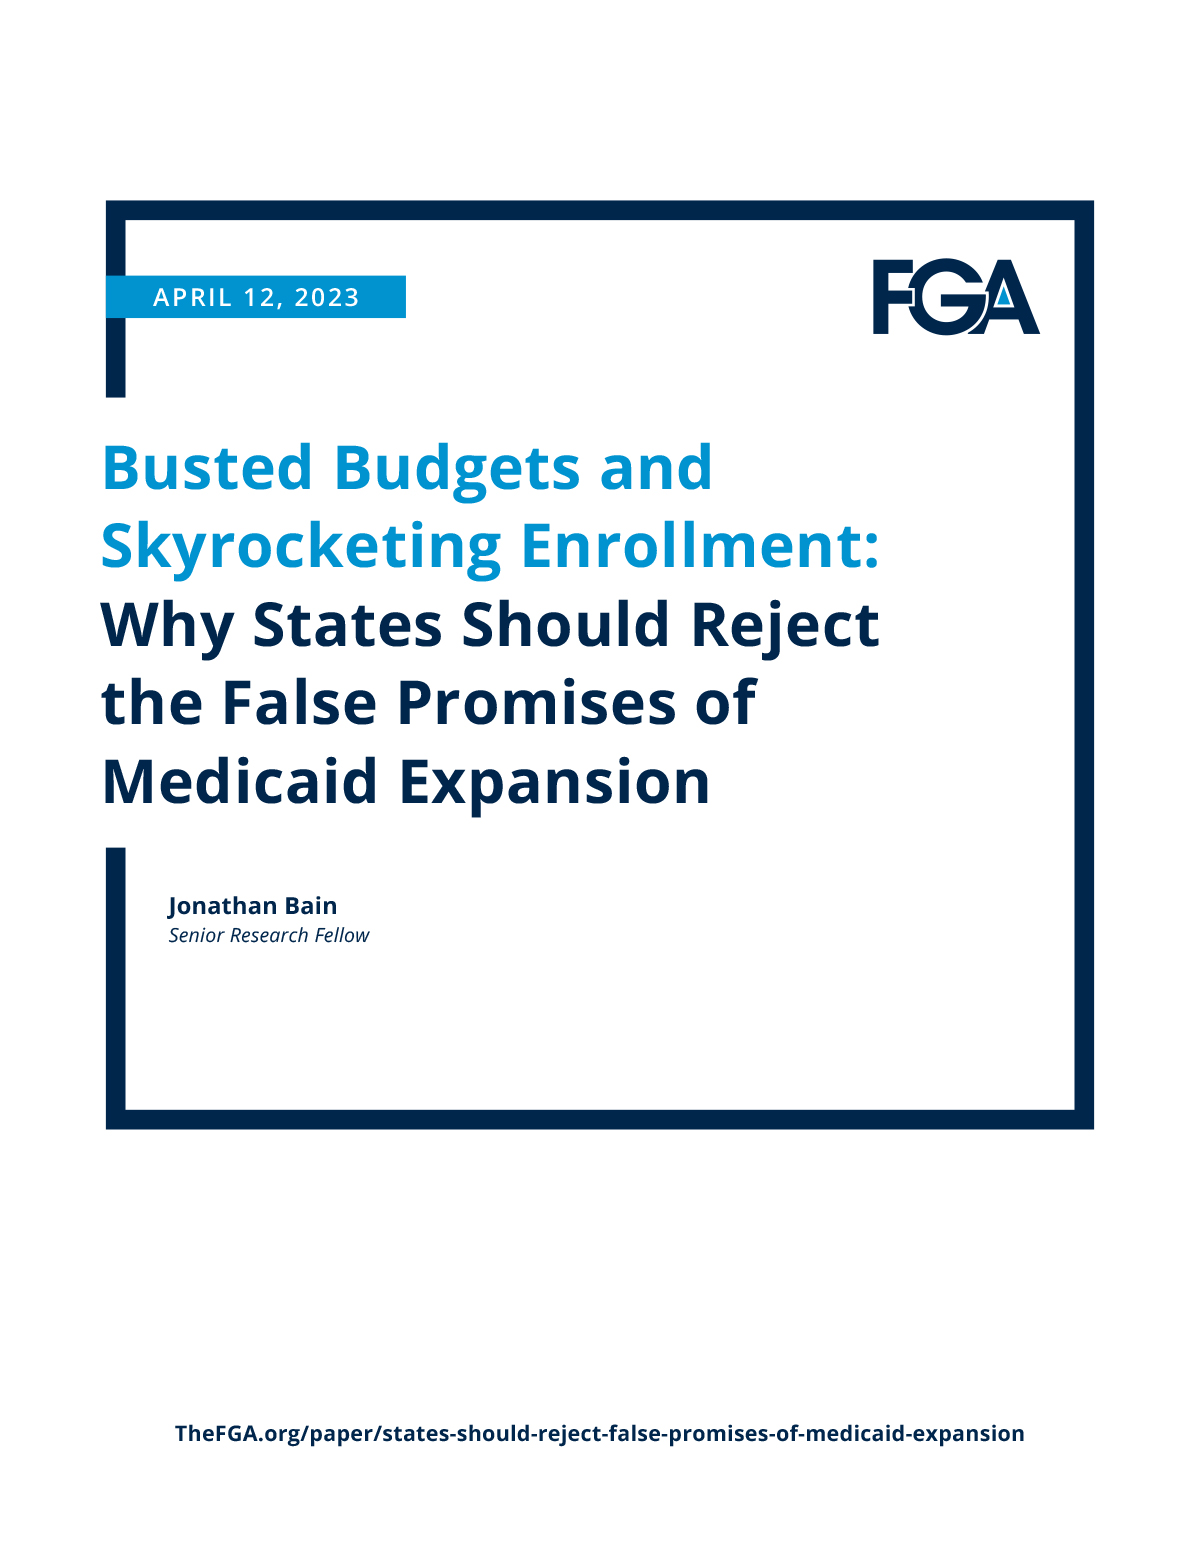 Busted Budgets and Skyrocketing Enrollment: Why States Should Reject the False Promises of Medicaid Expansion